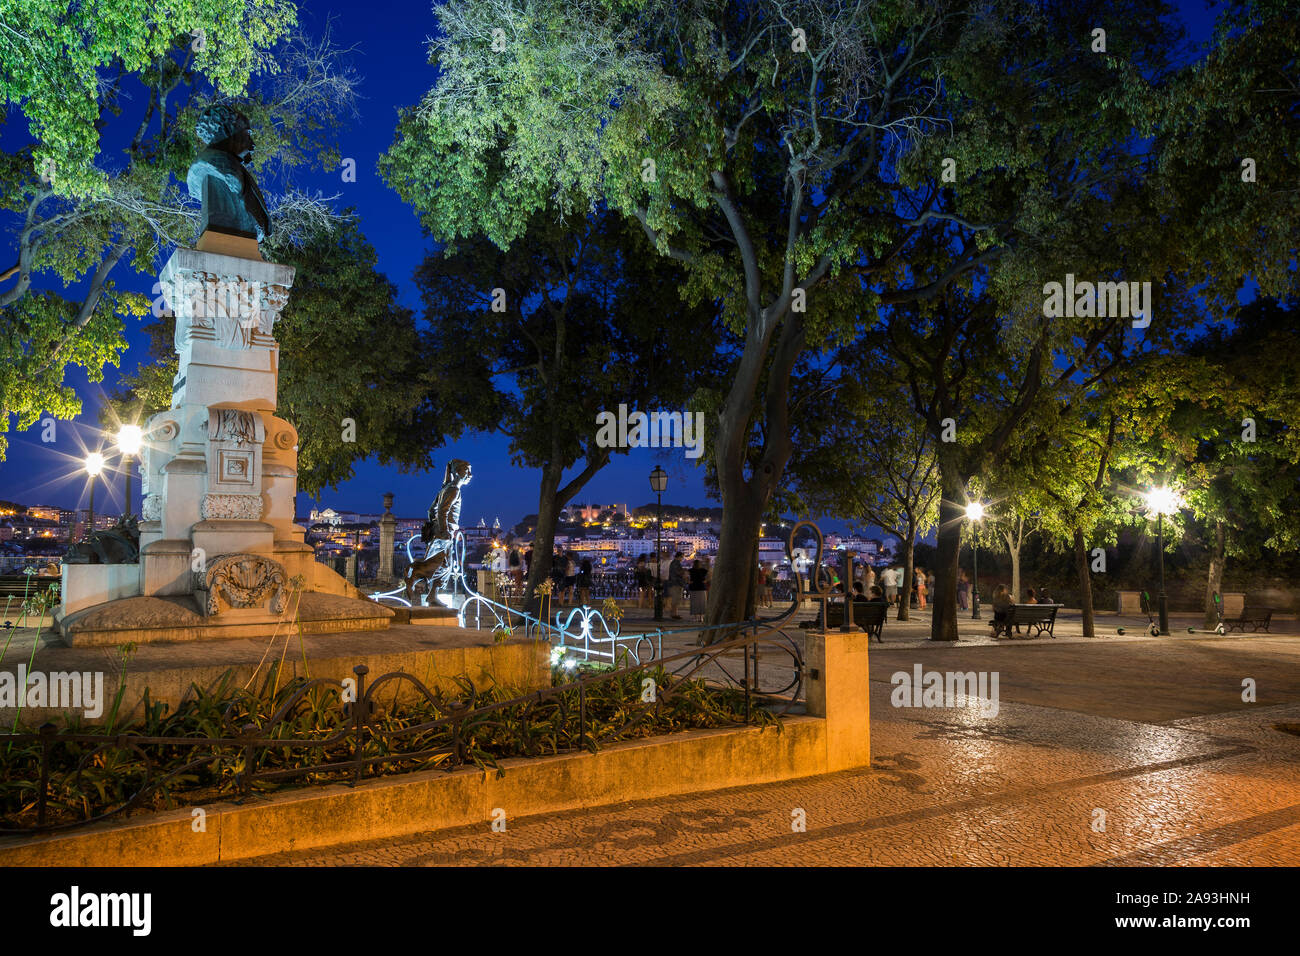 Illuminated statue and people at a park at the Miradouro de Sao Pedro de Alcantara viewpoint in Lisbon, Portugal, in the evening. Stock Photo